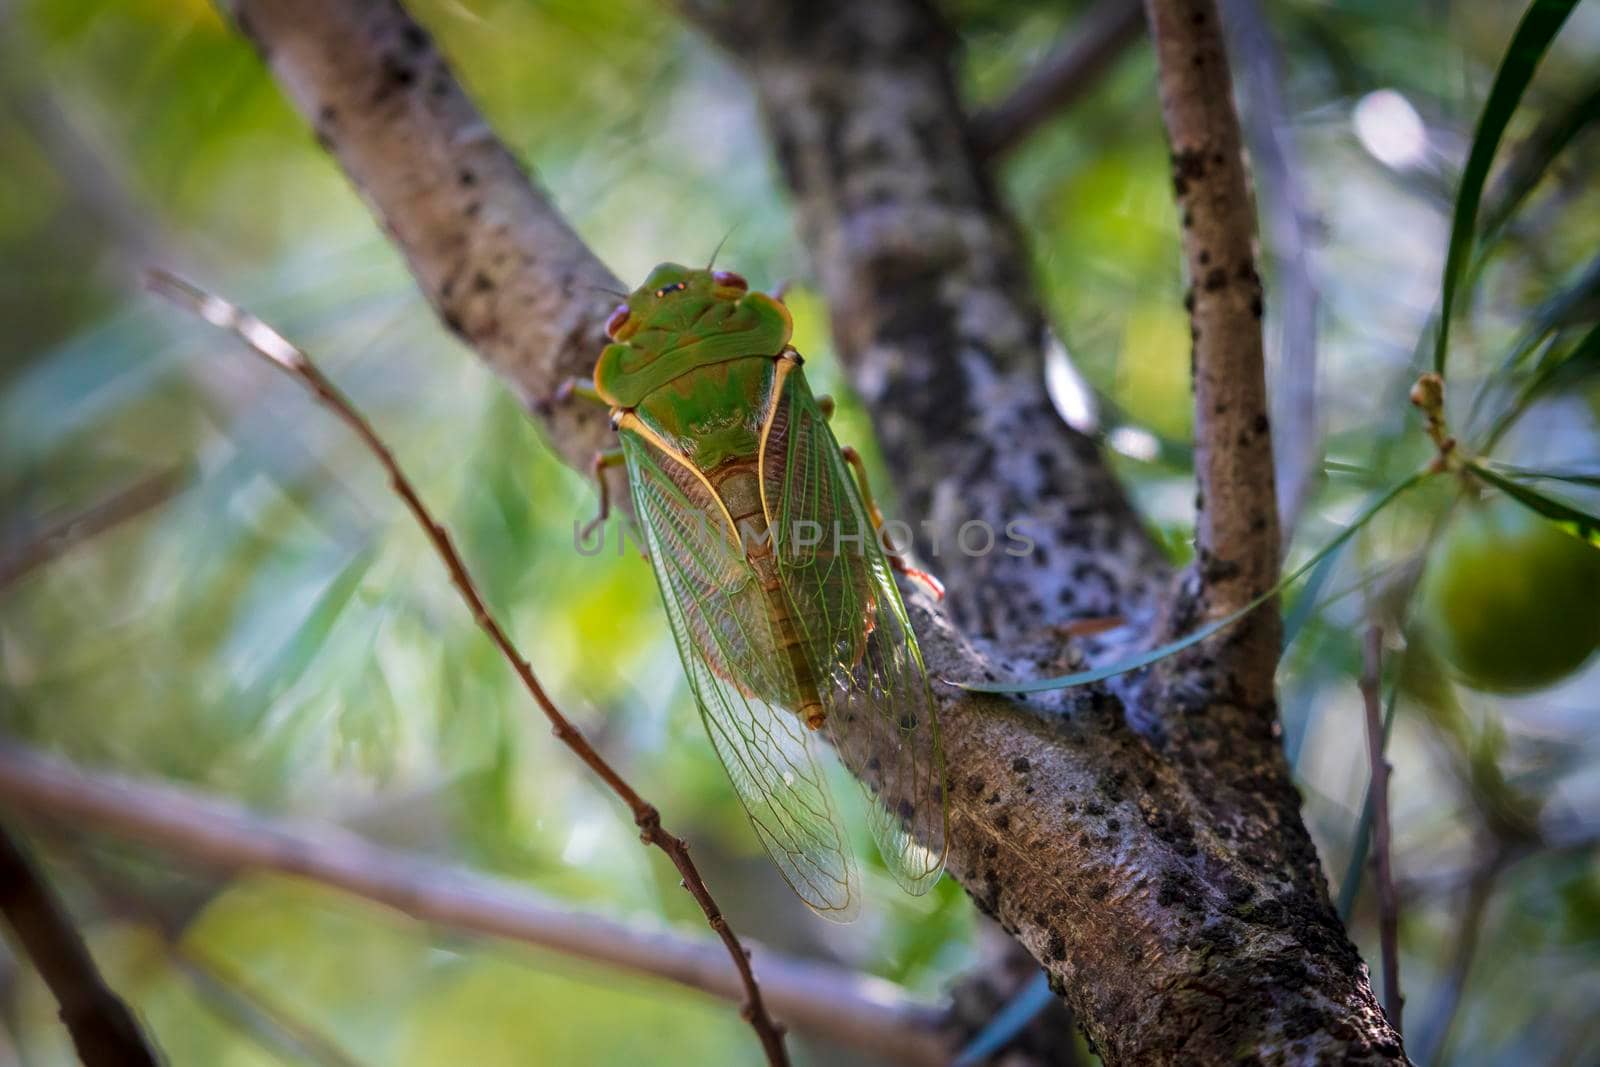 A green Cicada walking on a tree branch in a forest by WittkePhotos